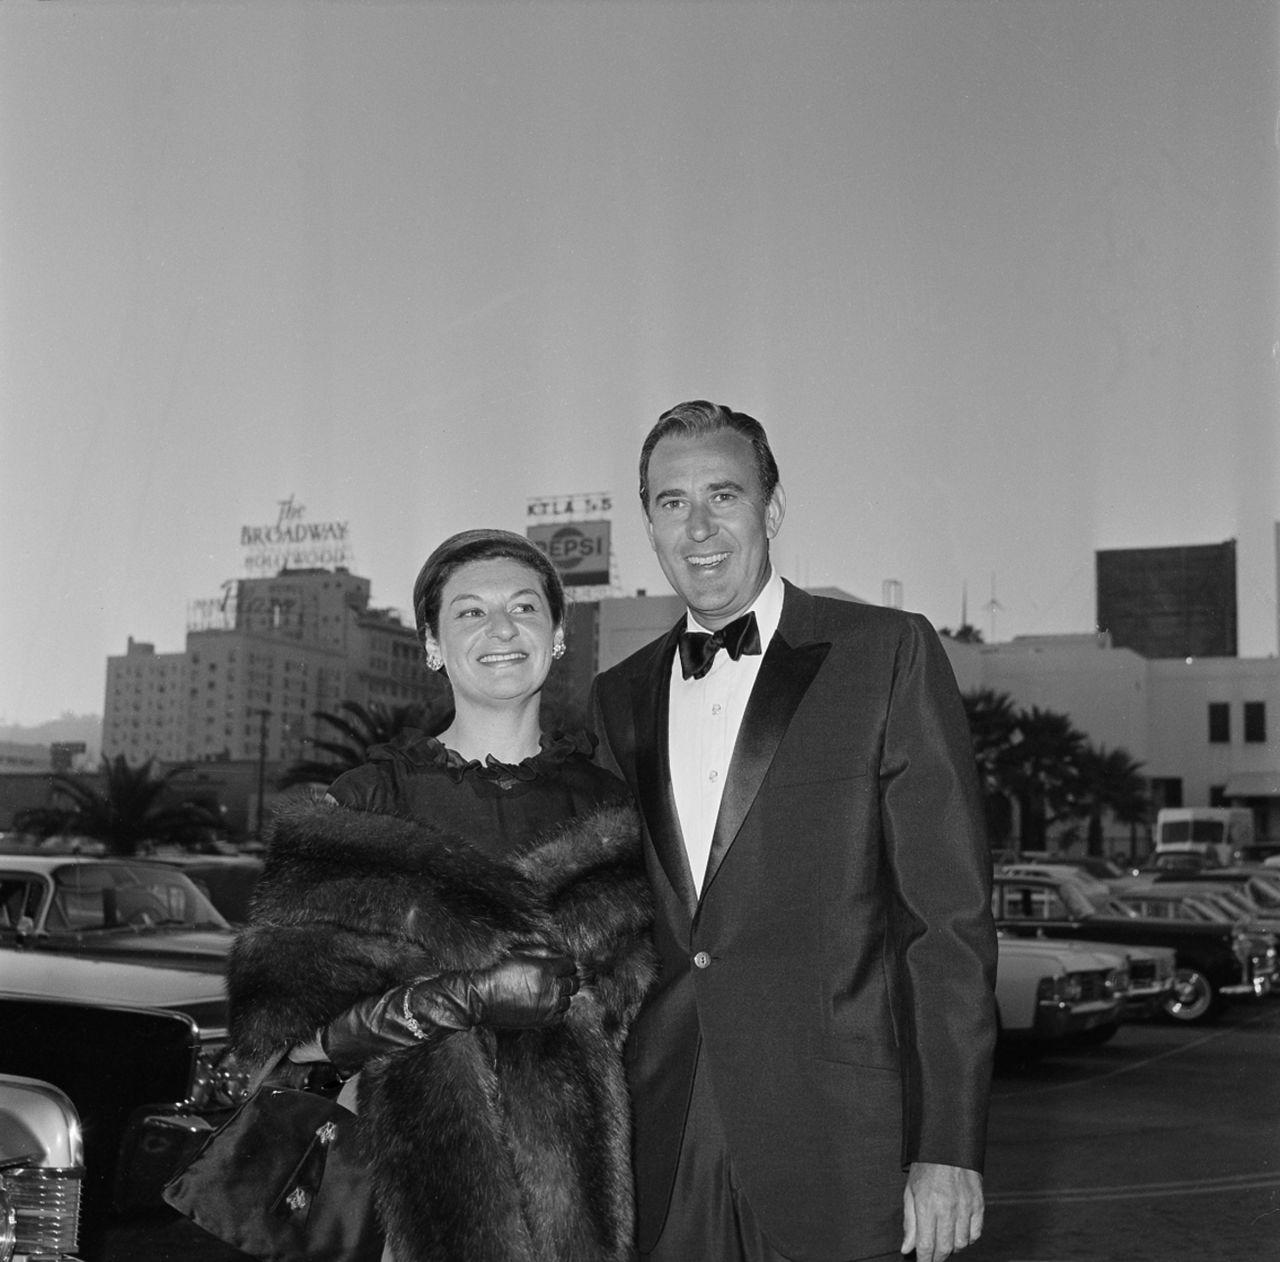 Reiner and his wife Estelle Reiner arrive at the 1965 Emmy Awards in Hollywood. The pair were married for almost 65 years.